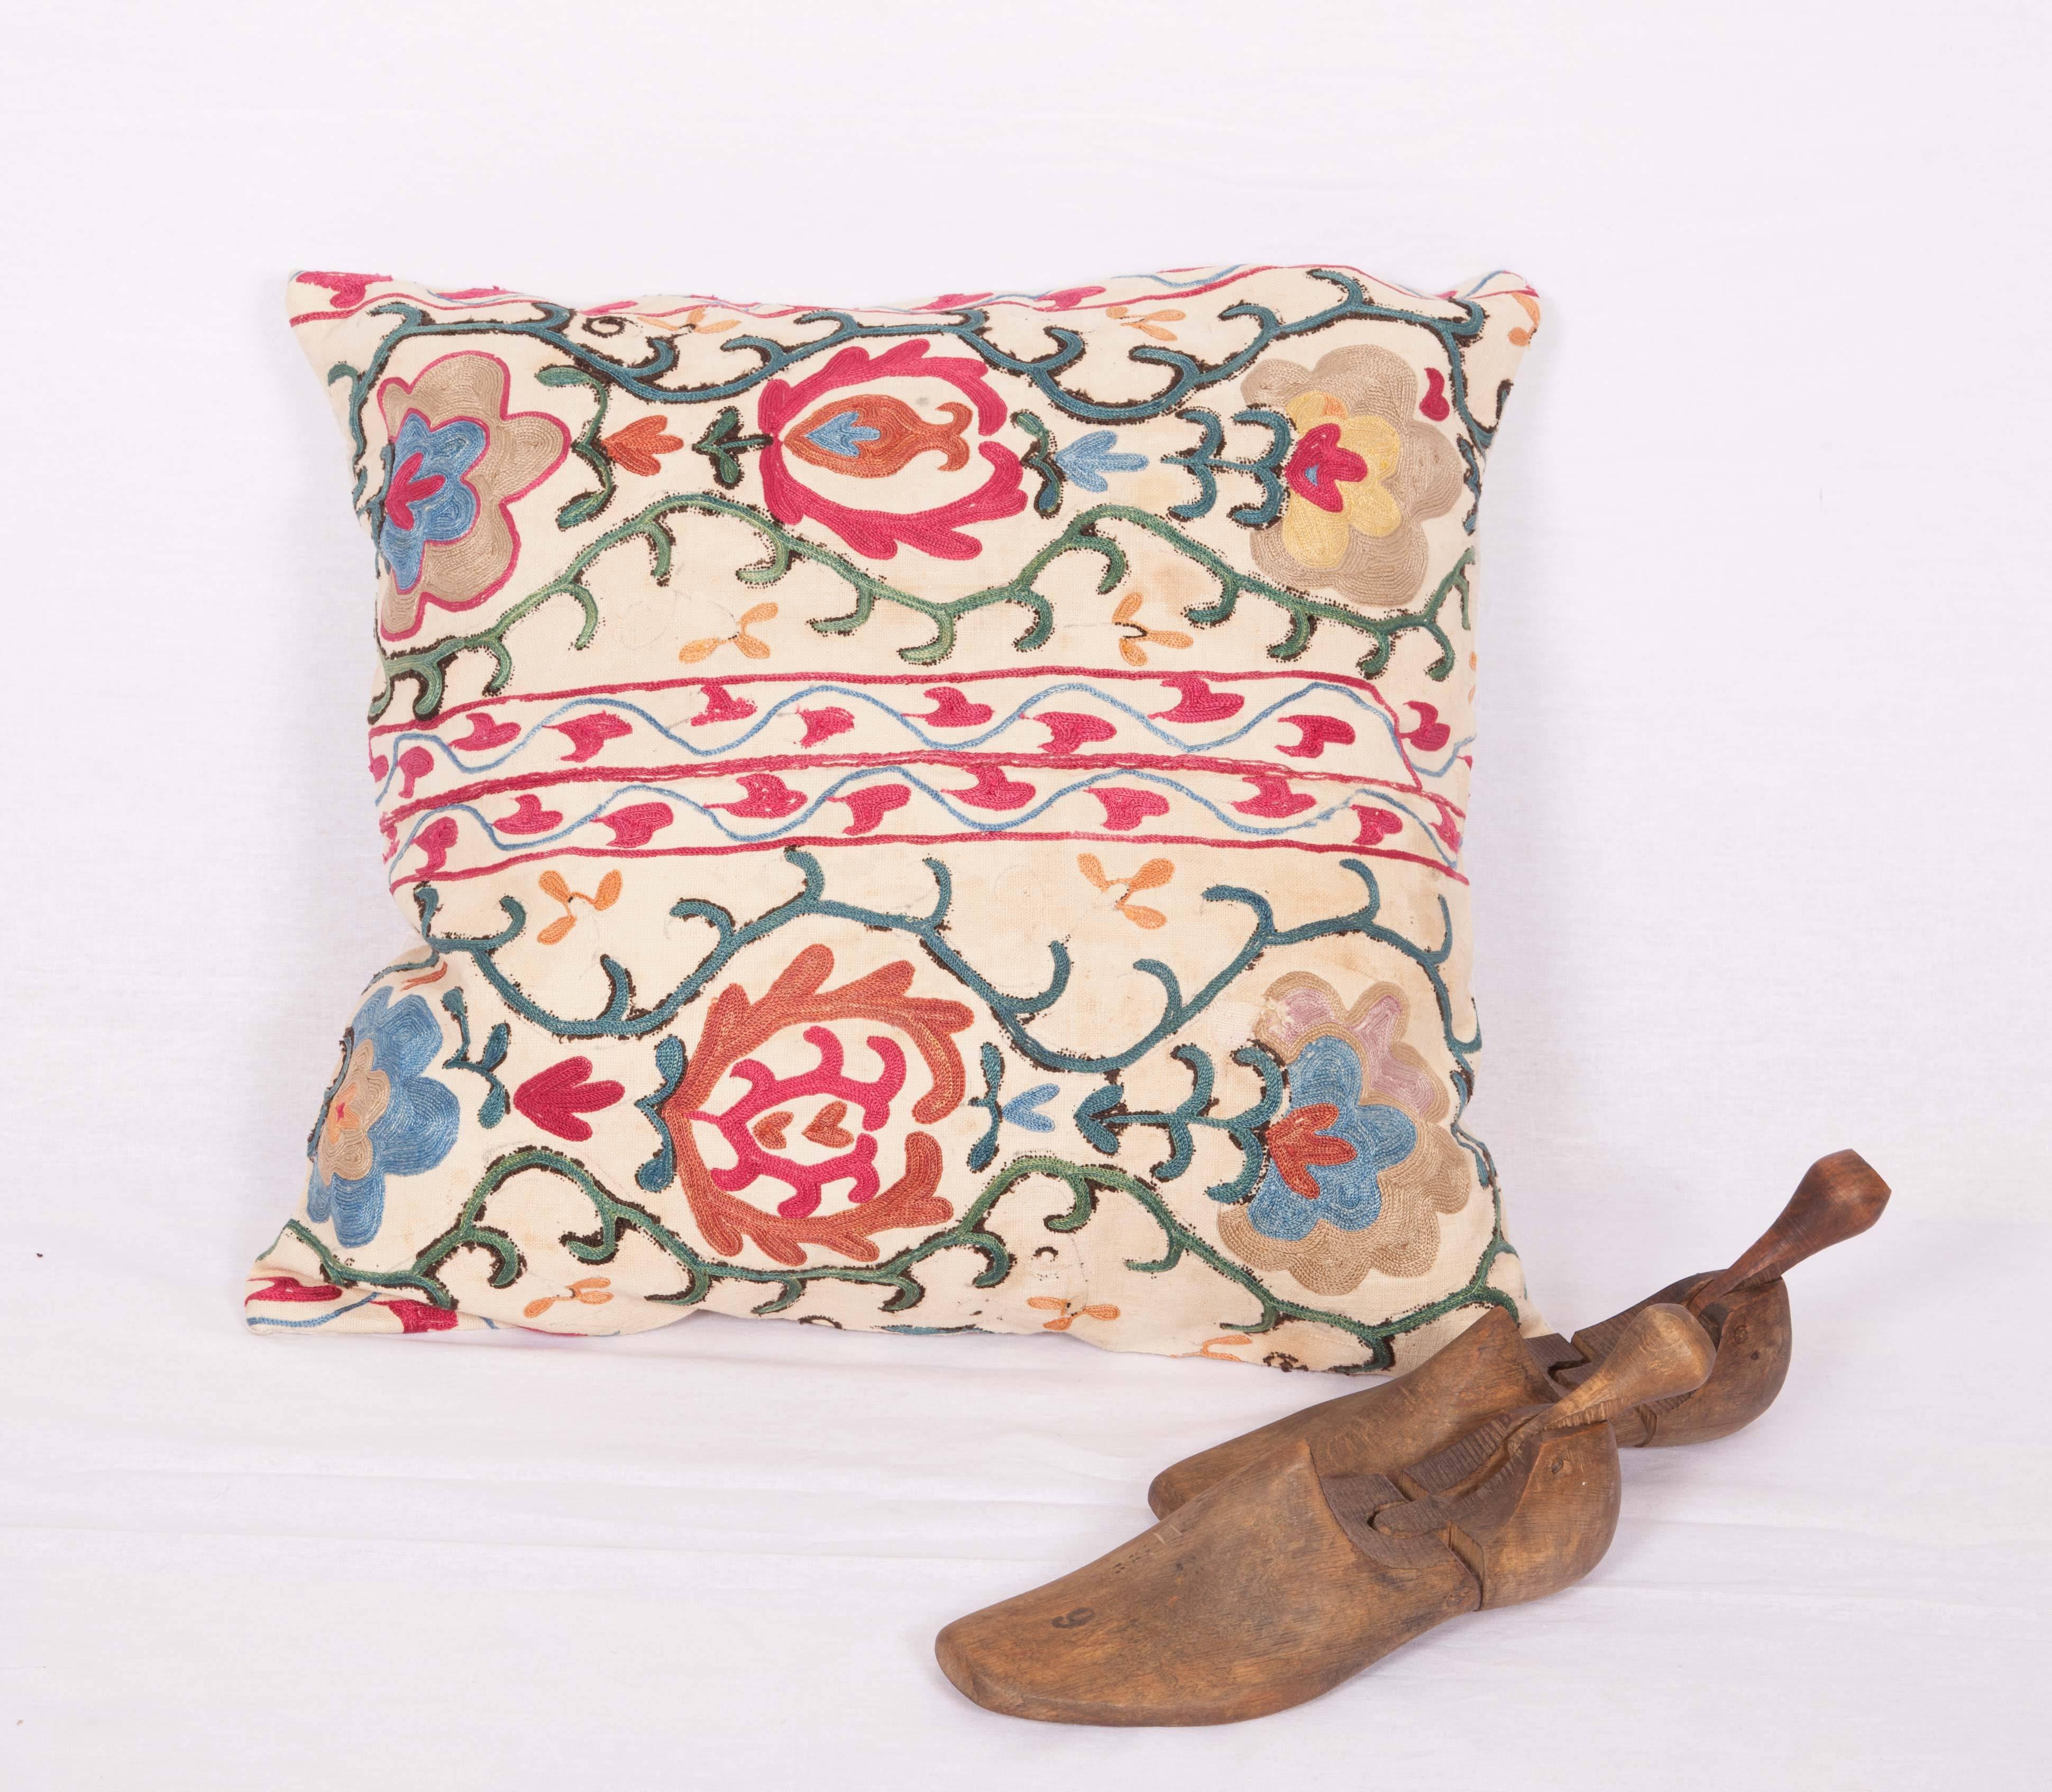 Embroidered Antique Suzani Pillow Fashioned from a 19th Century Uzbek Suzani